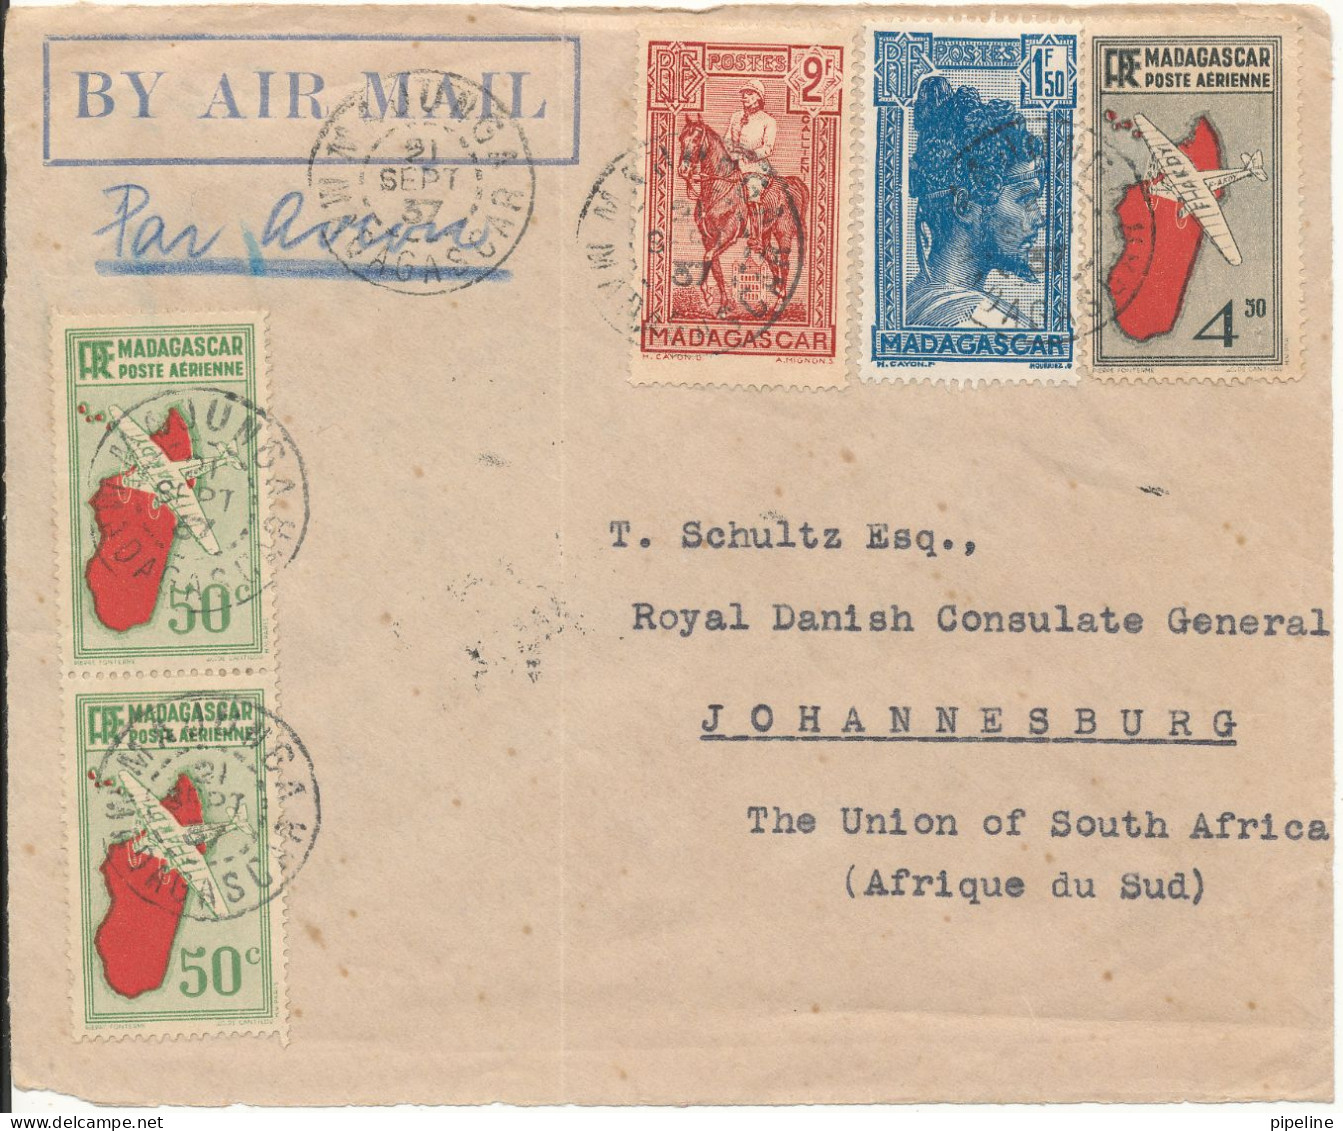 Madagascar FRONTPAGE Of A Cover Sent To The Royal Danish Consulate Johannesburg South Africa 21-9-1937 NB: NB : - Luchtpost